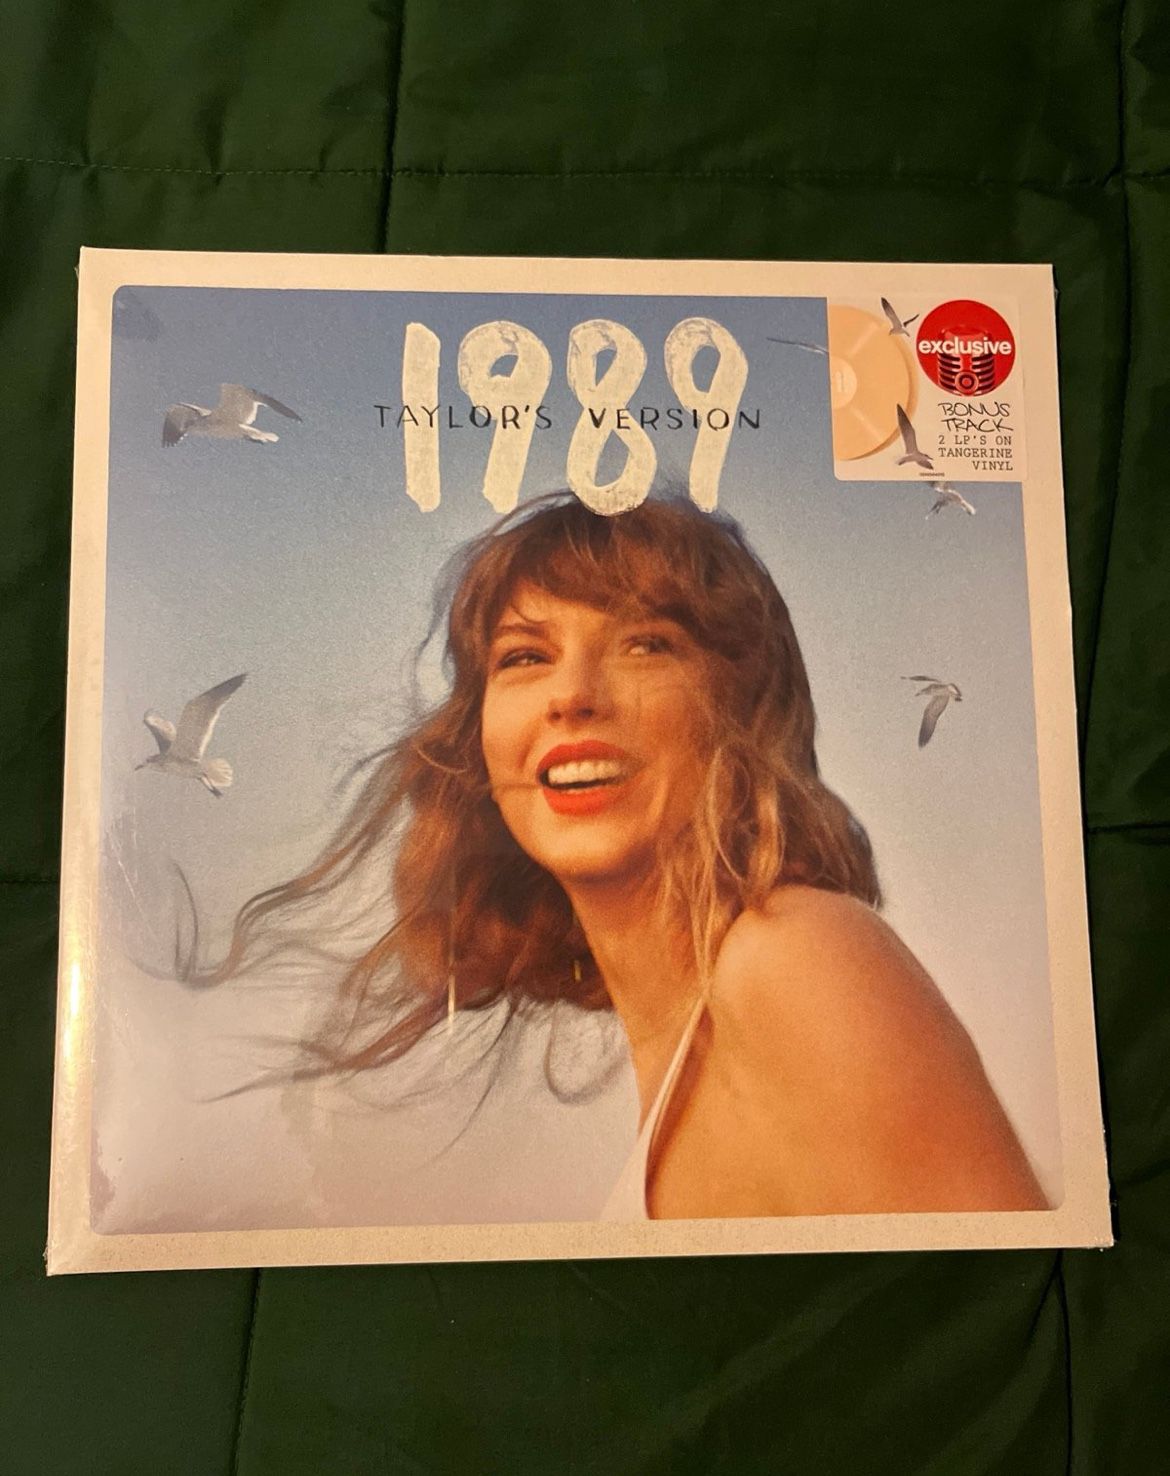 1989 taylor’s version target edition